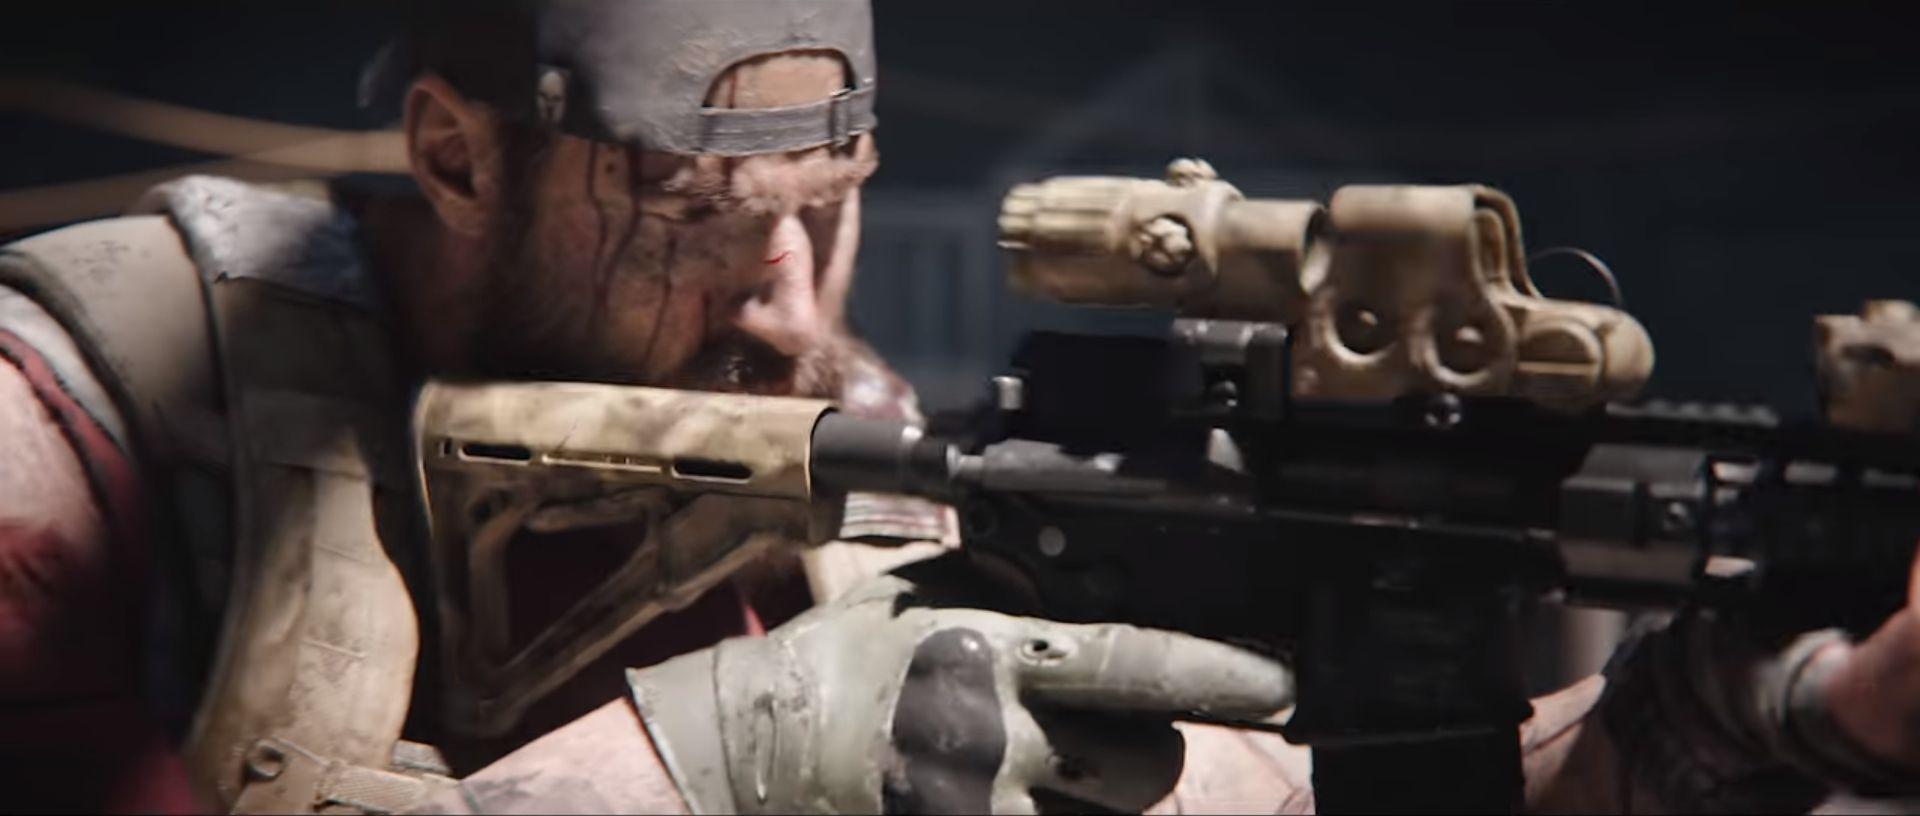 GHOST RECON BREAKPOINT Gets a Crazy and Gameplay Video